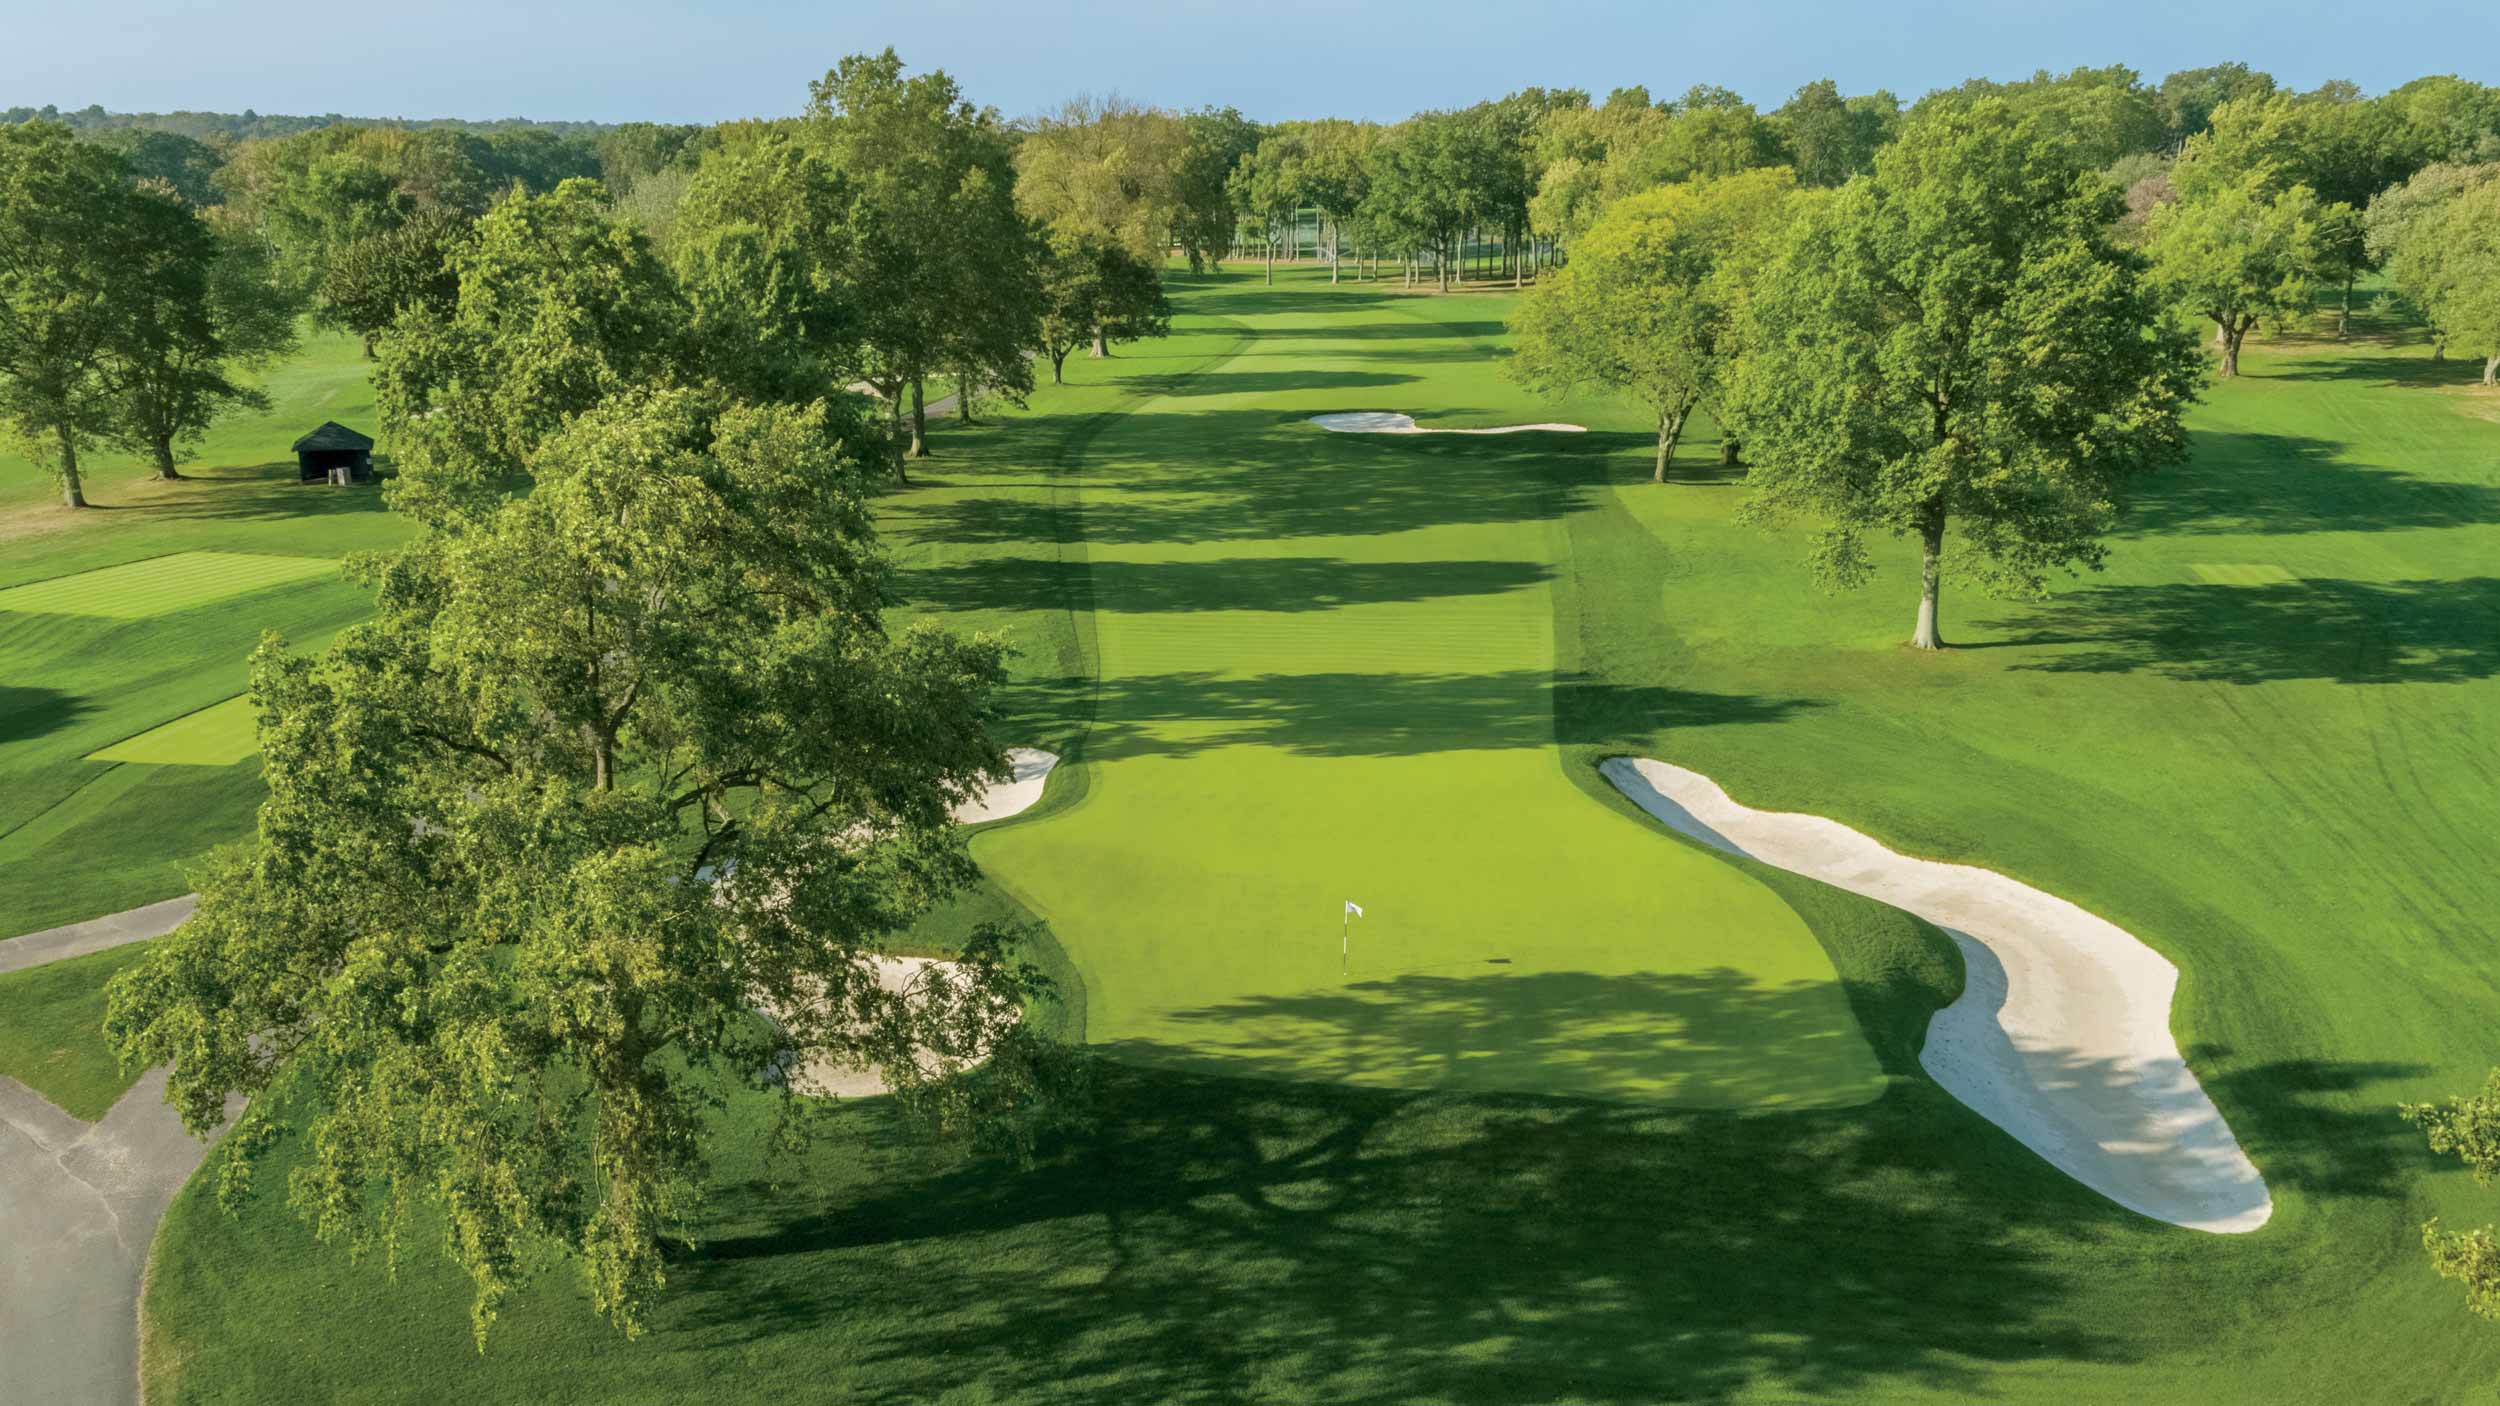 9 ways this U.S. Open at Winged Foot will Open unlike any other